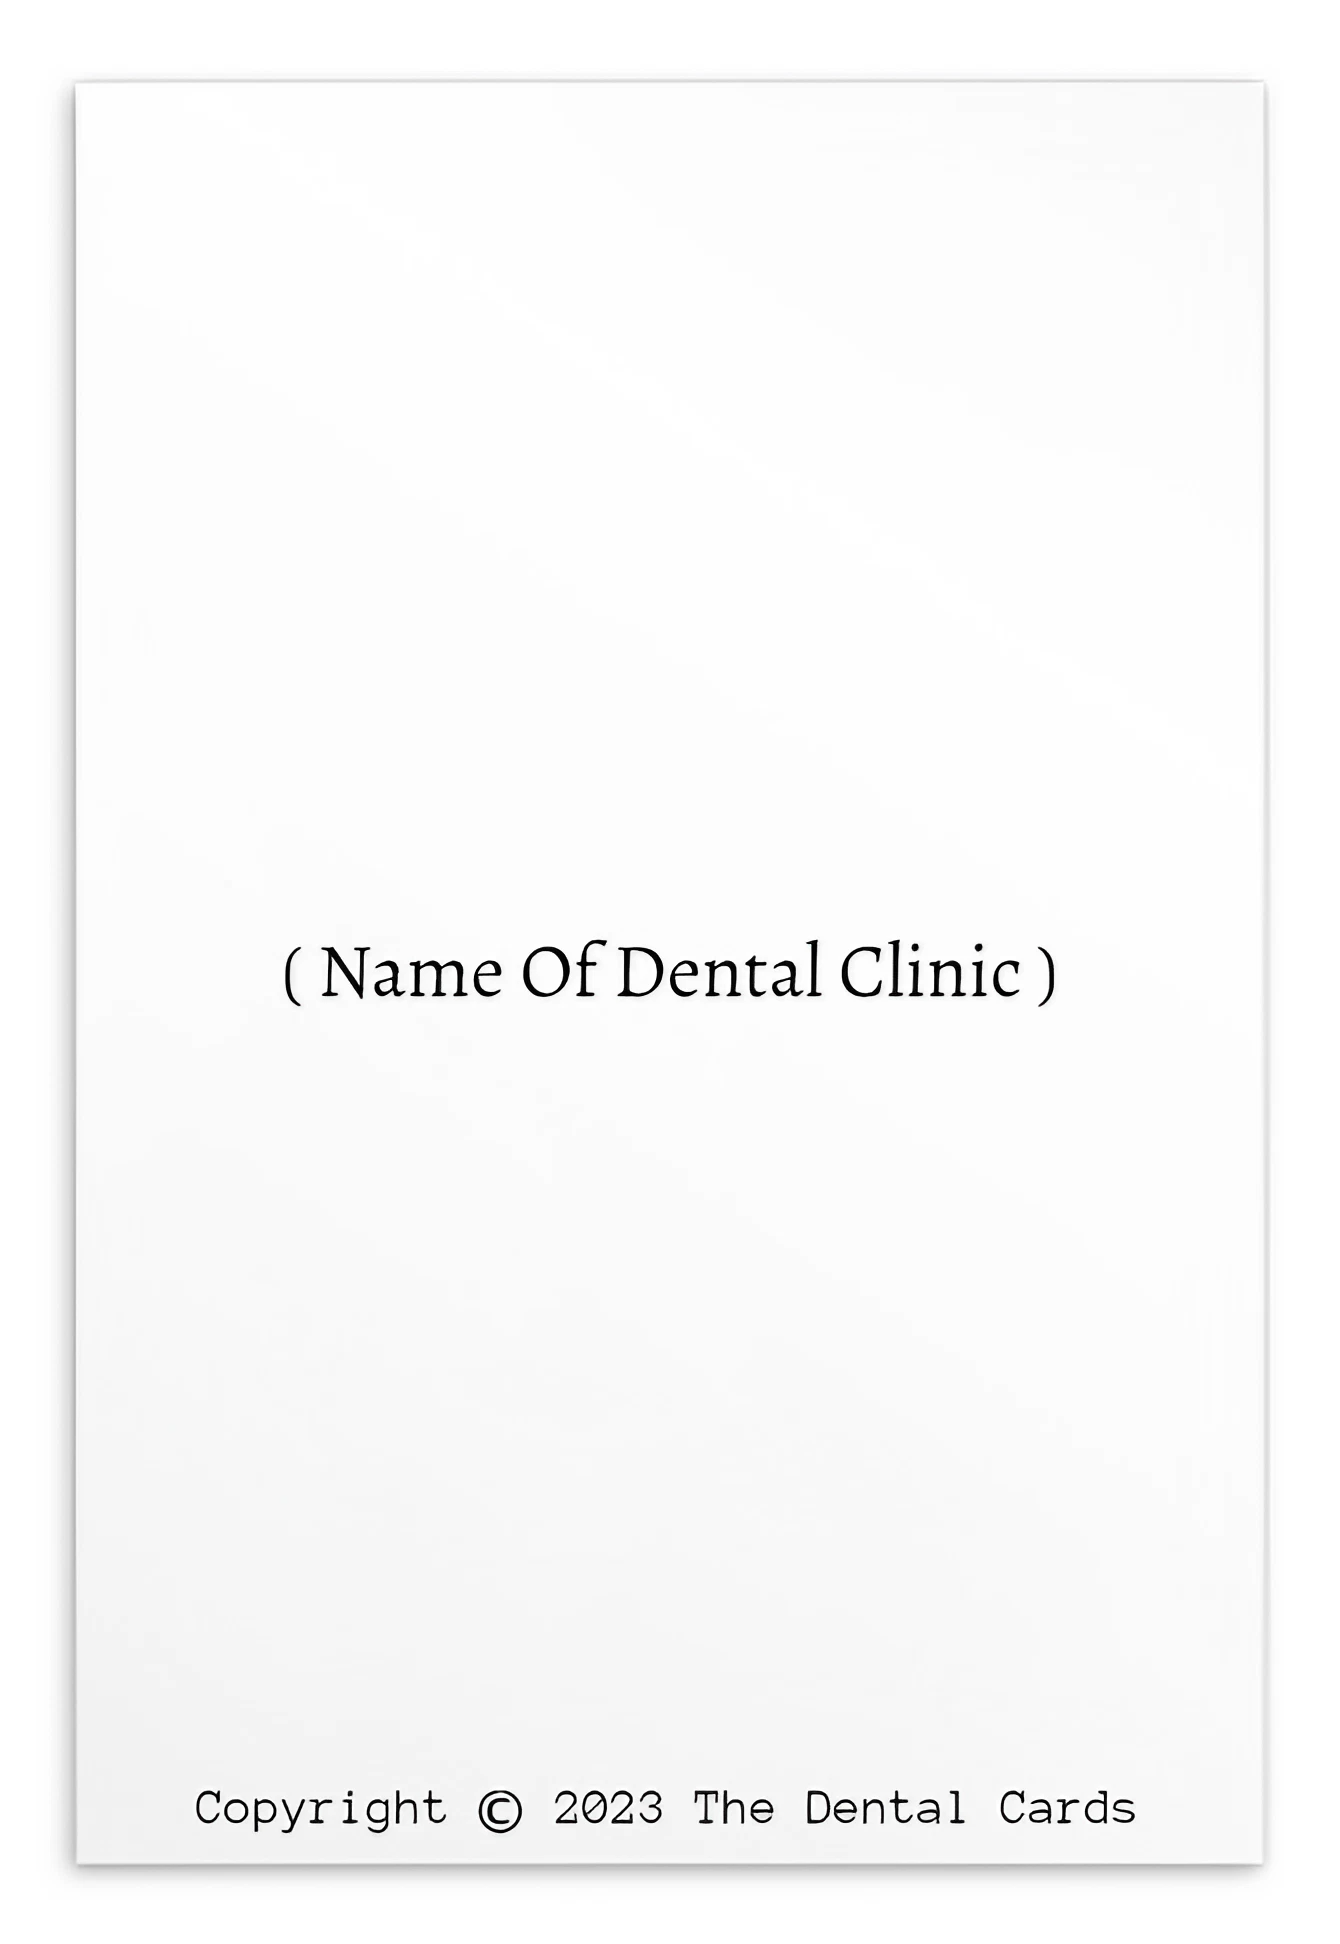 Oral Hygiene Cards- It's Essential To Floss Your Teeth At Least Once Daily